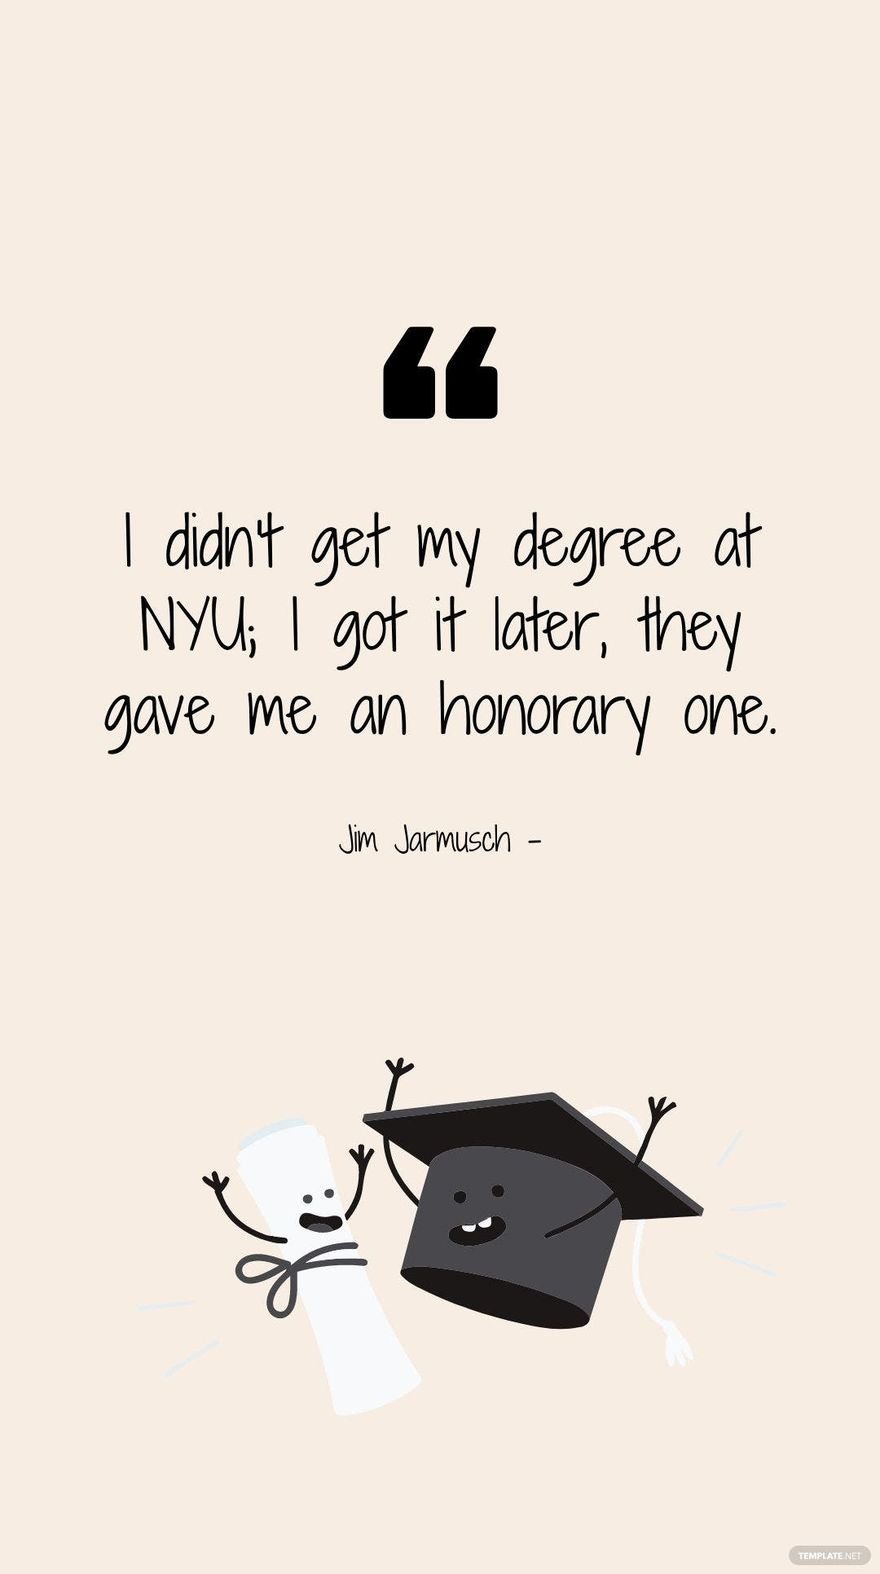 Jim Jarmusch - I didn't get my degree at NYU; I got it later, they gave me an honourary one.